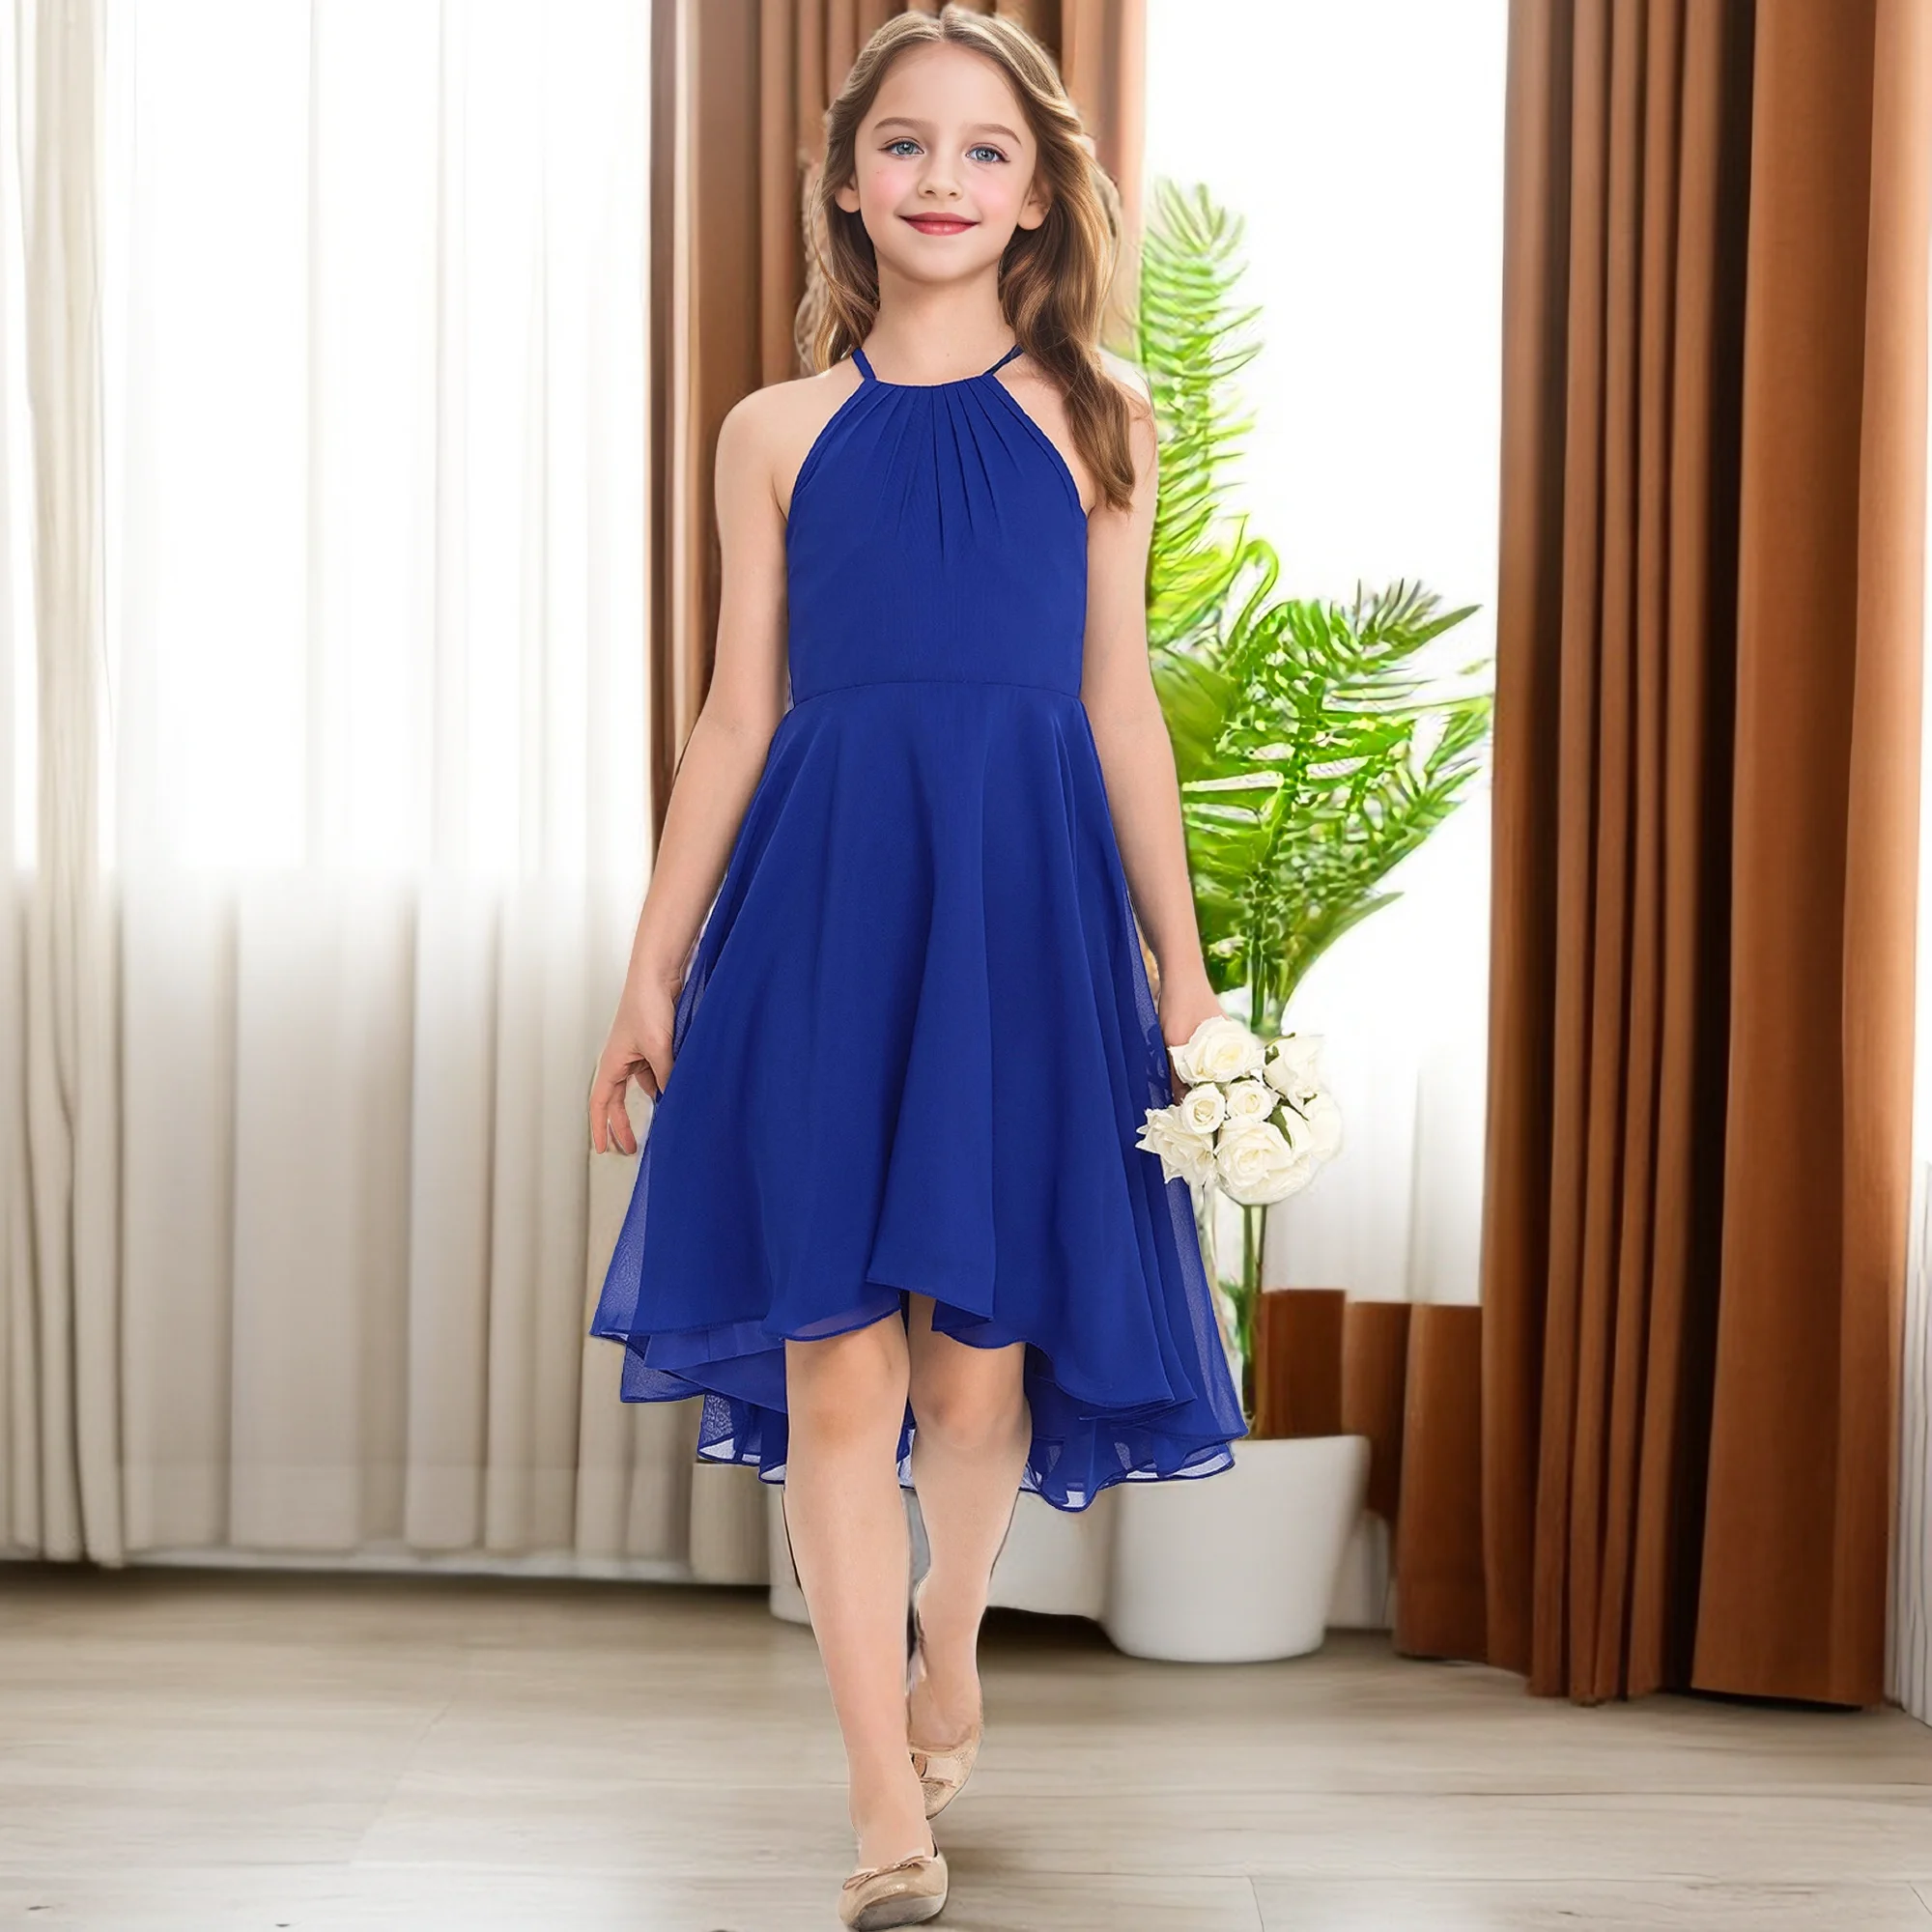 

Kids Assymetrical Chiffon Junior Bridesmaid Dress Wedding Ceremony Banquet Prom Night Birthday Party Event Pageant Evening Gown